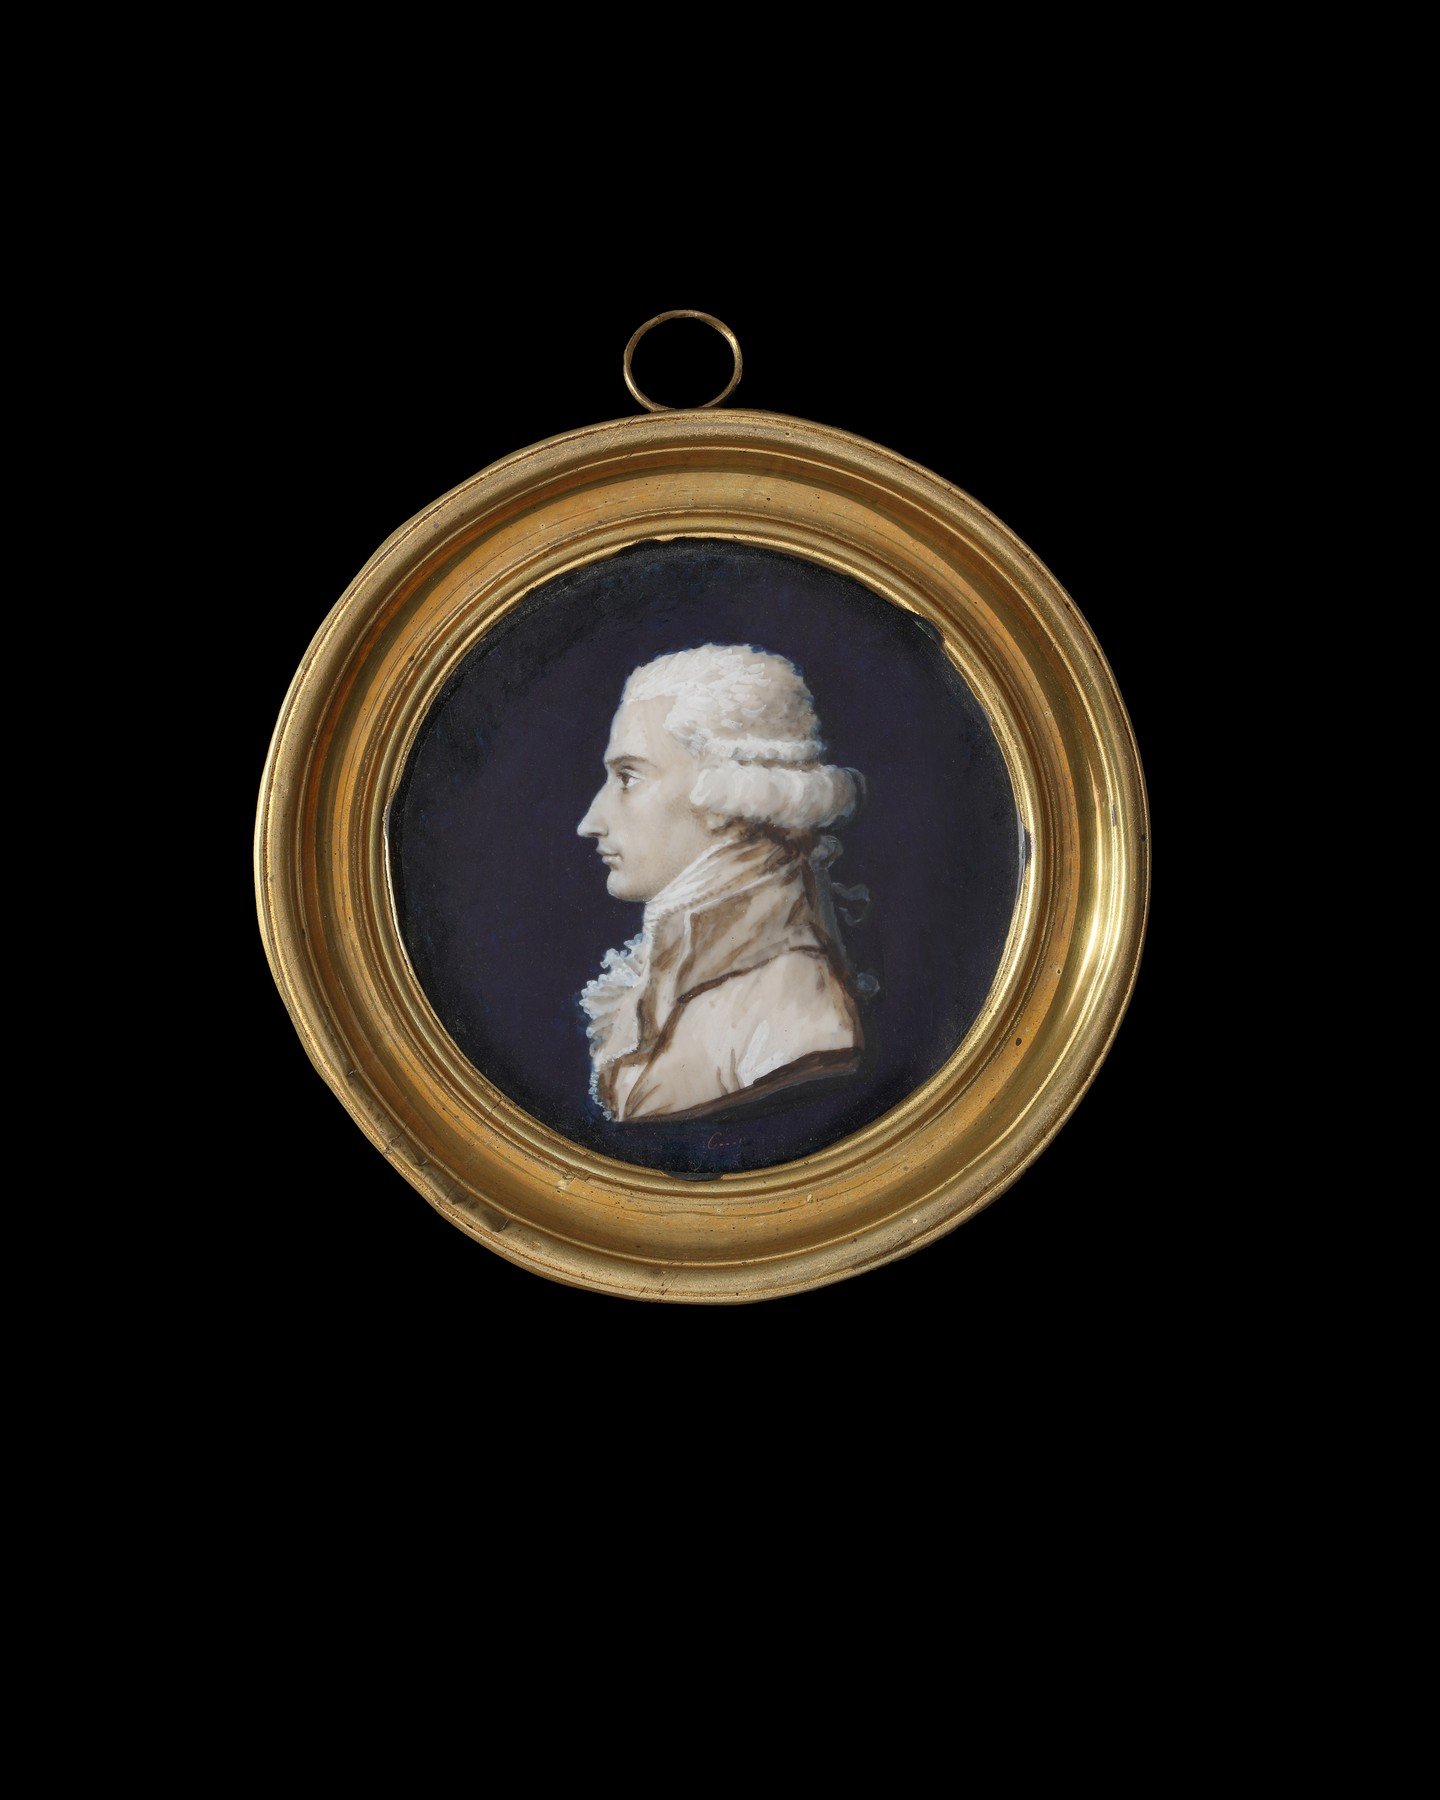 *New to the website* 👾 available, and perfect for #fashionfriday is this fascinating portrait miniature of Marie Antoinette's Crown Jeweller, George-Fr&eacute;deric Bapst (1756-1826), painted by JEAN-URBAIN GU&Eacute;RIN (1760-1836) 'en buste'. His 